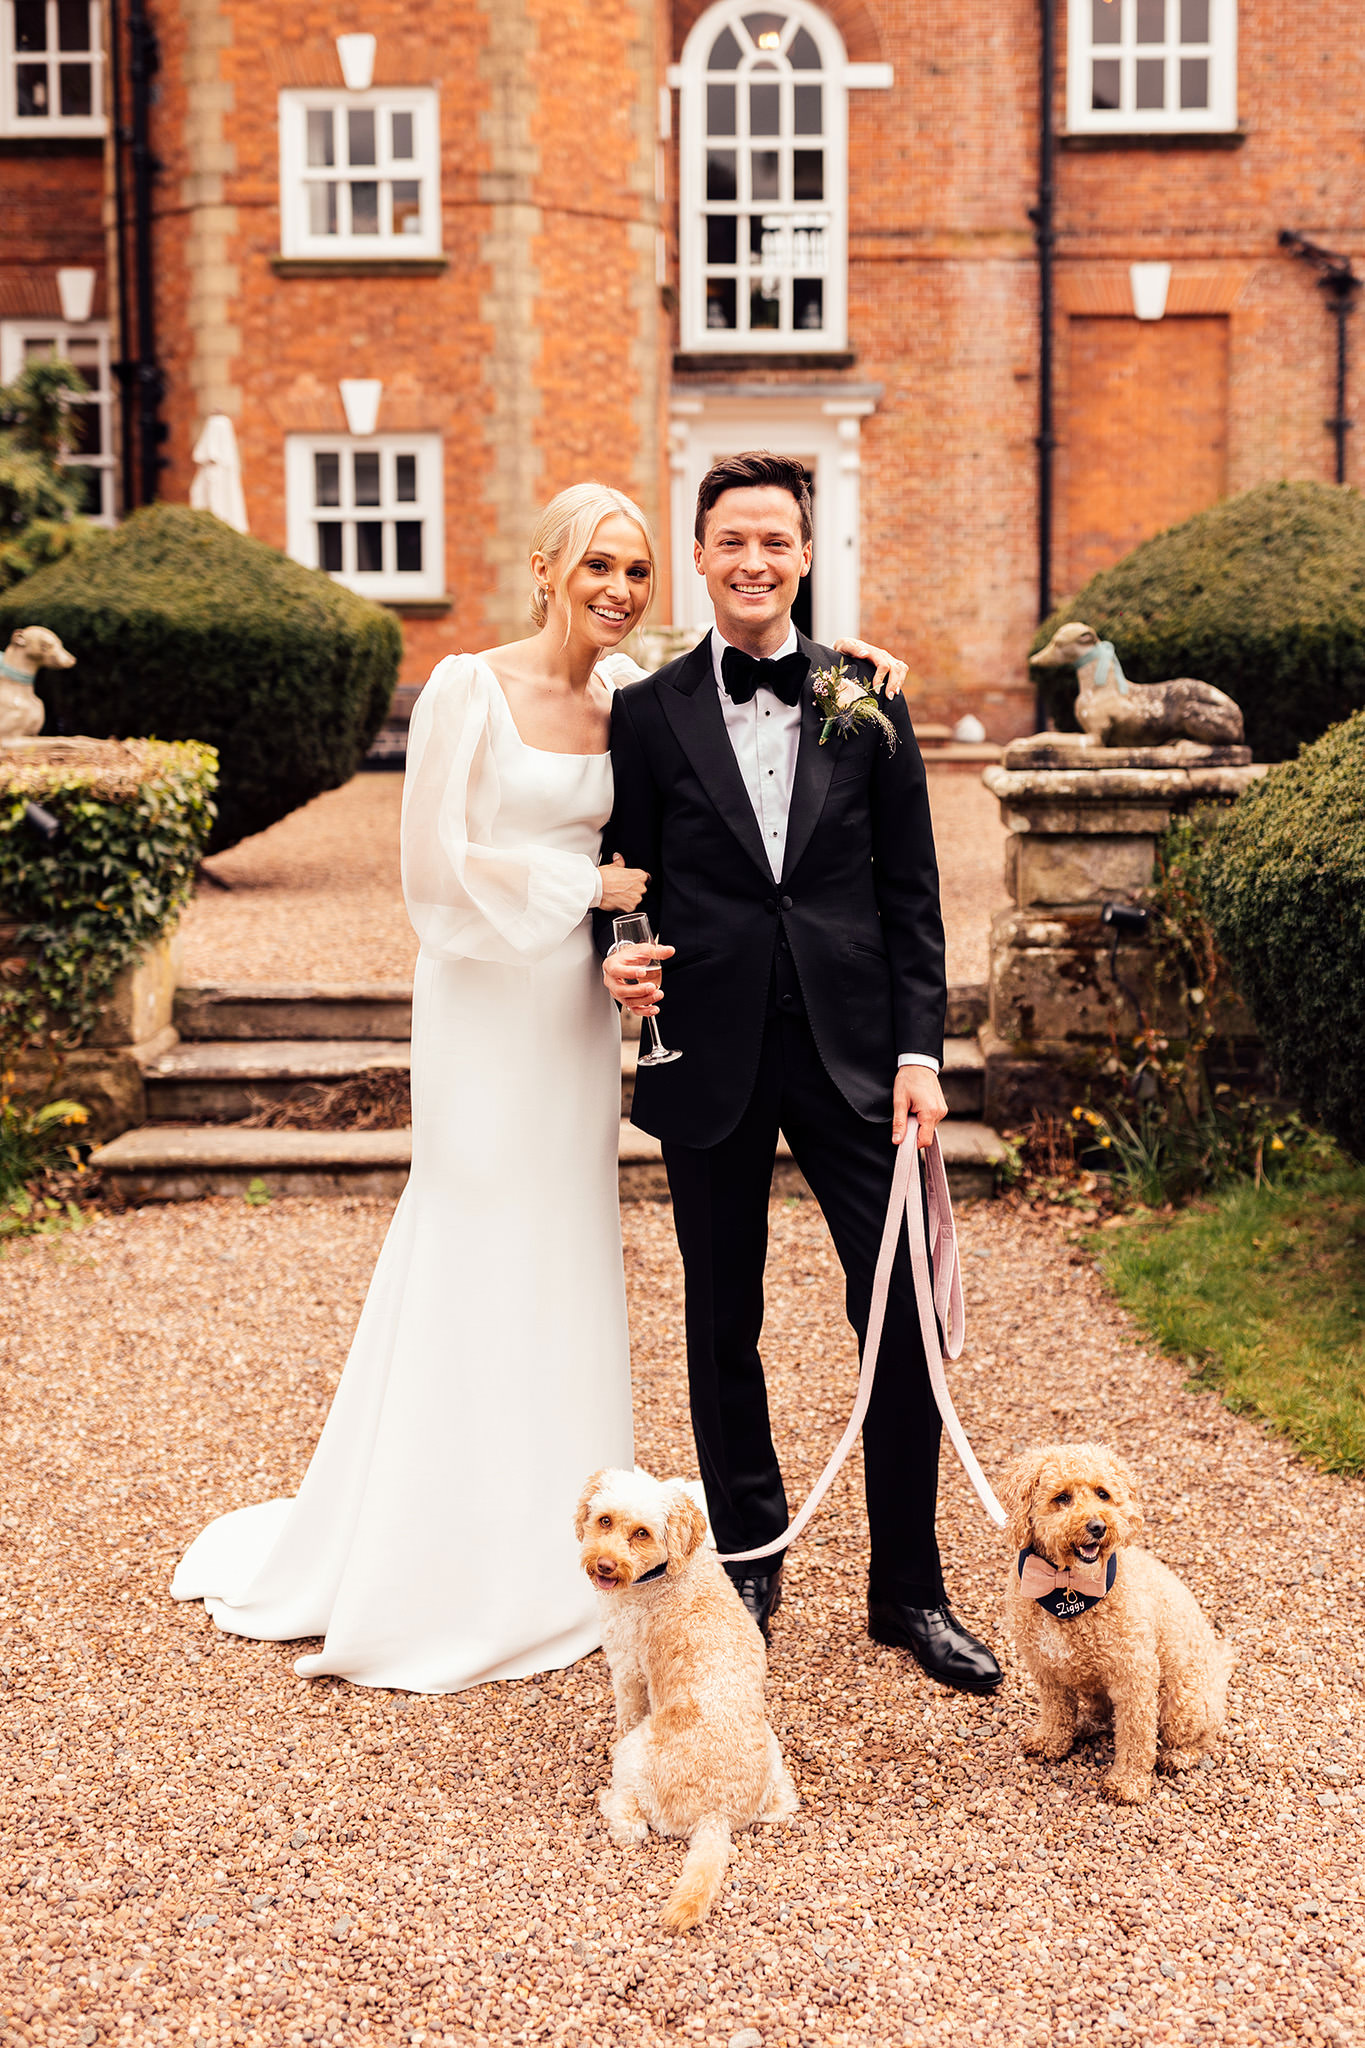 A bride in a slim fitting tulle wedding dress and a groom wearing a black tie walk in landscaped gardens with two pet terrier dogs on ribboned leads